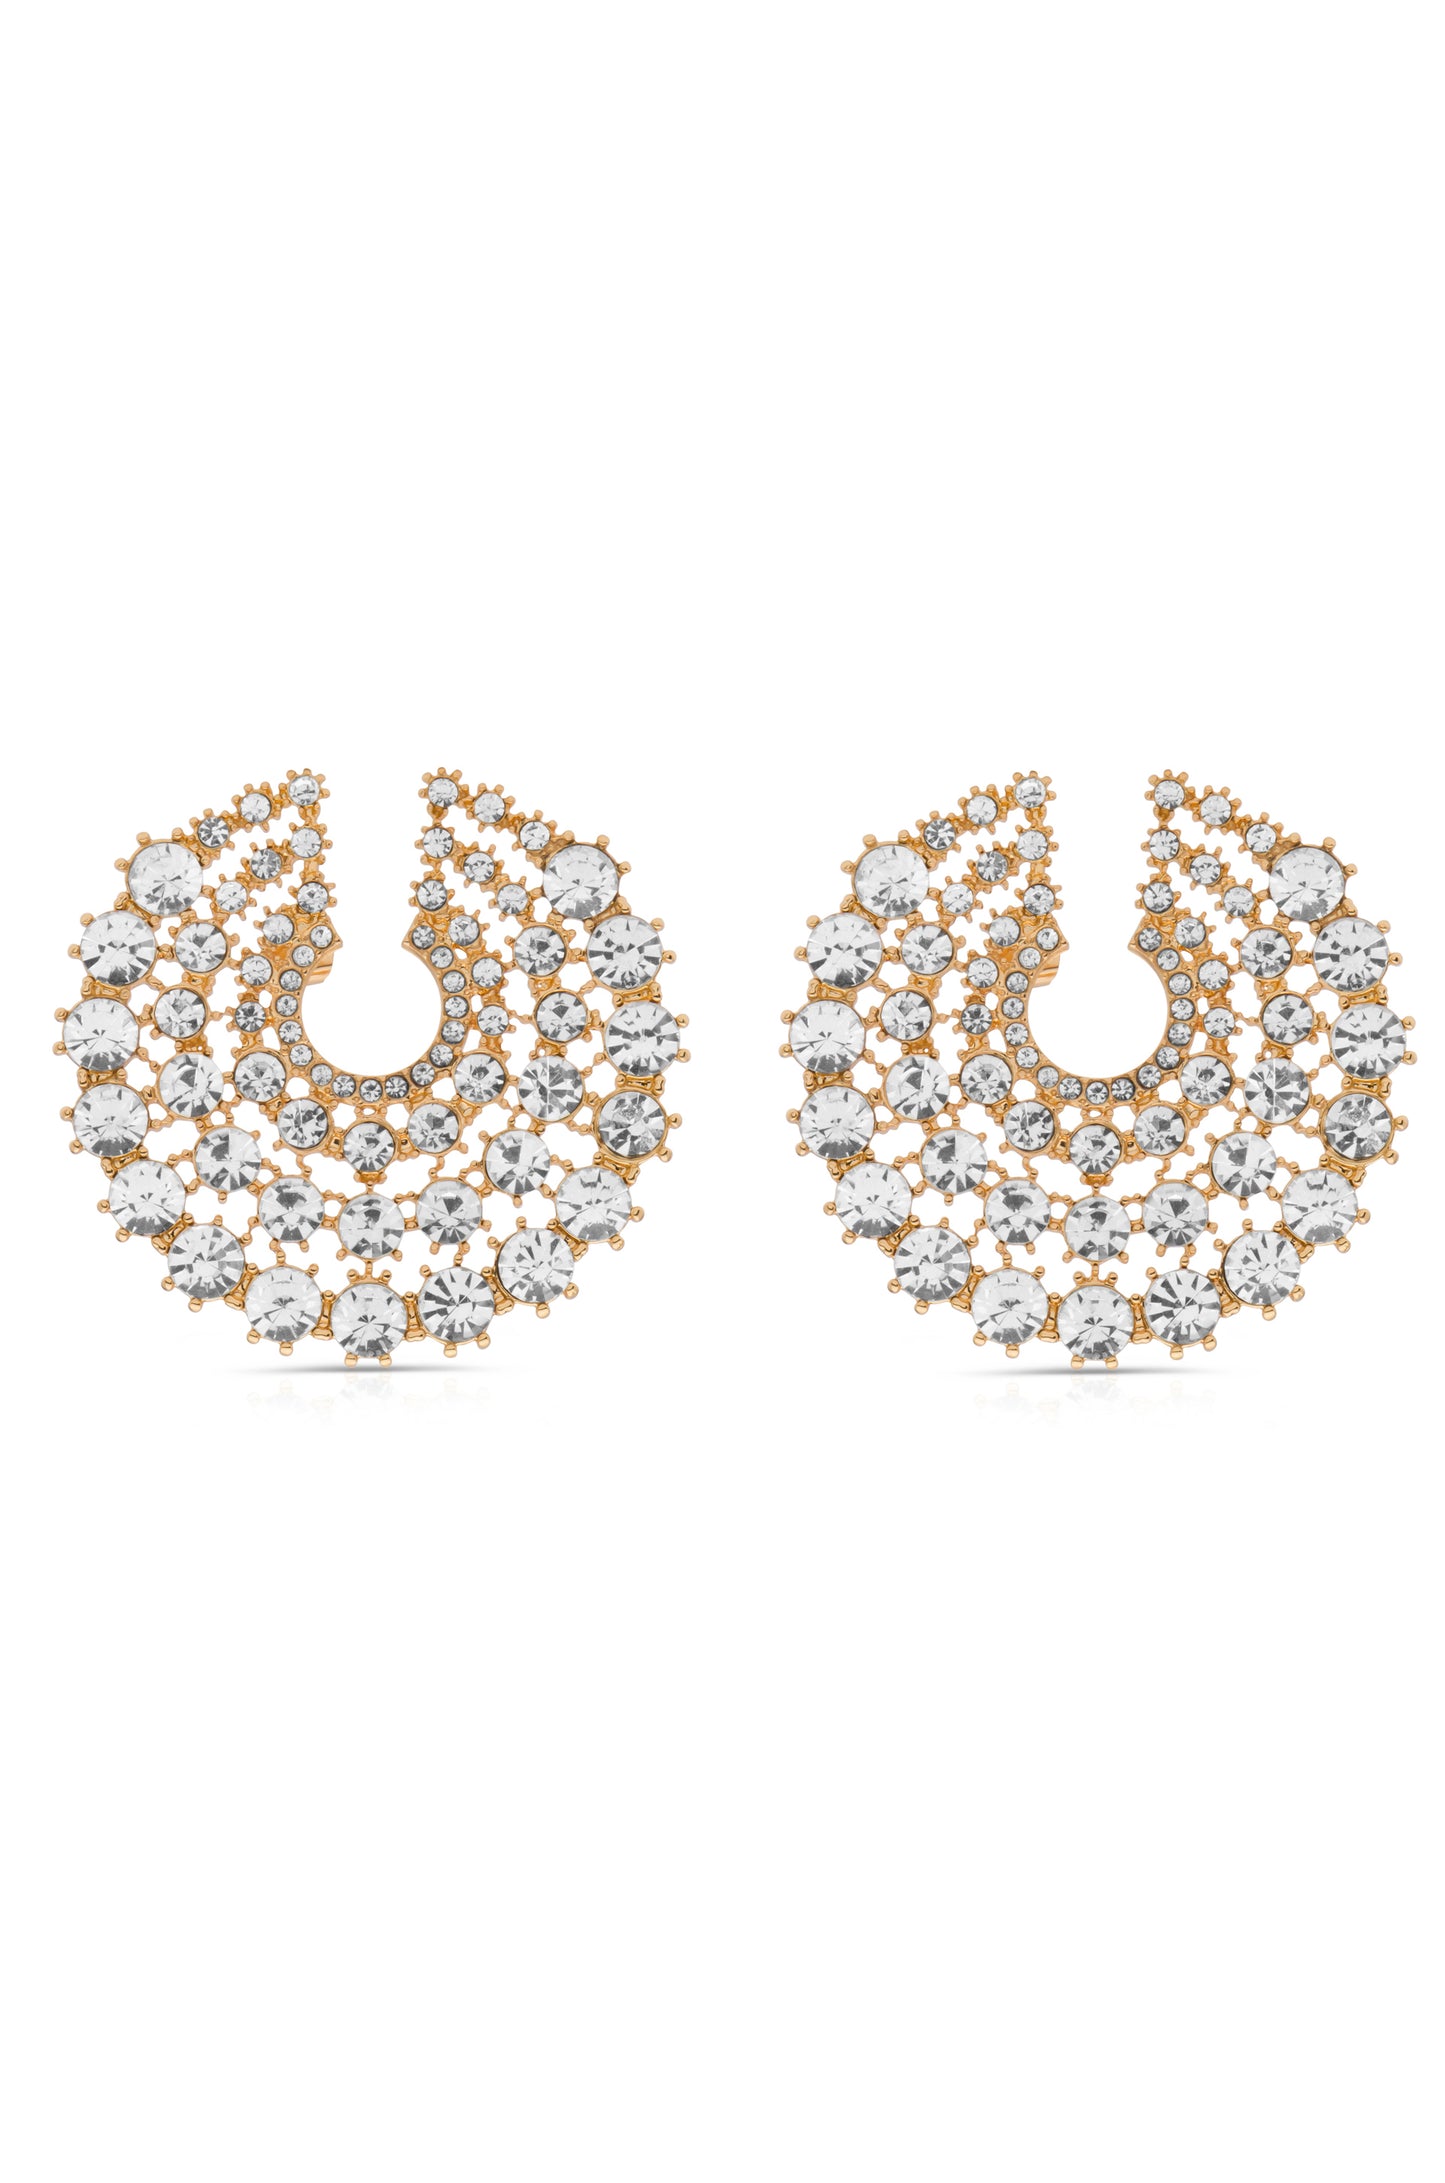 Crystal Party 18k Gold Plated Earrings